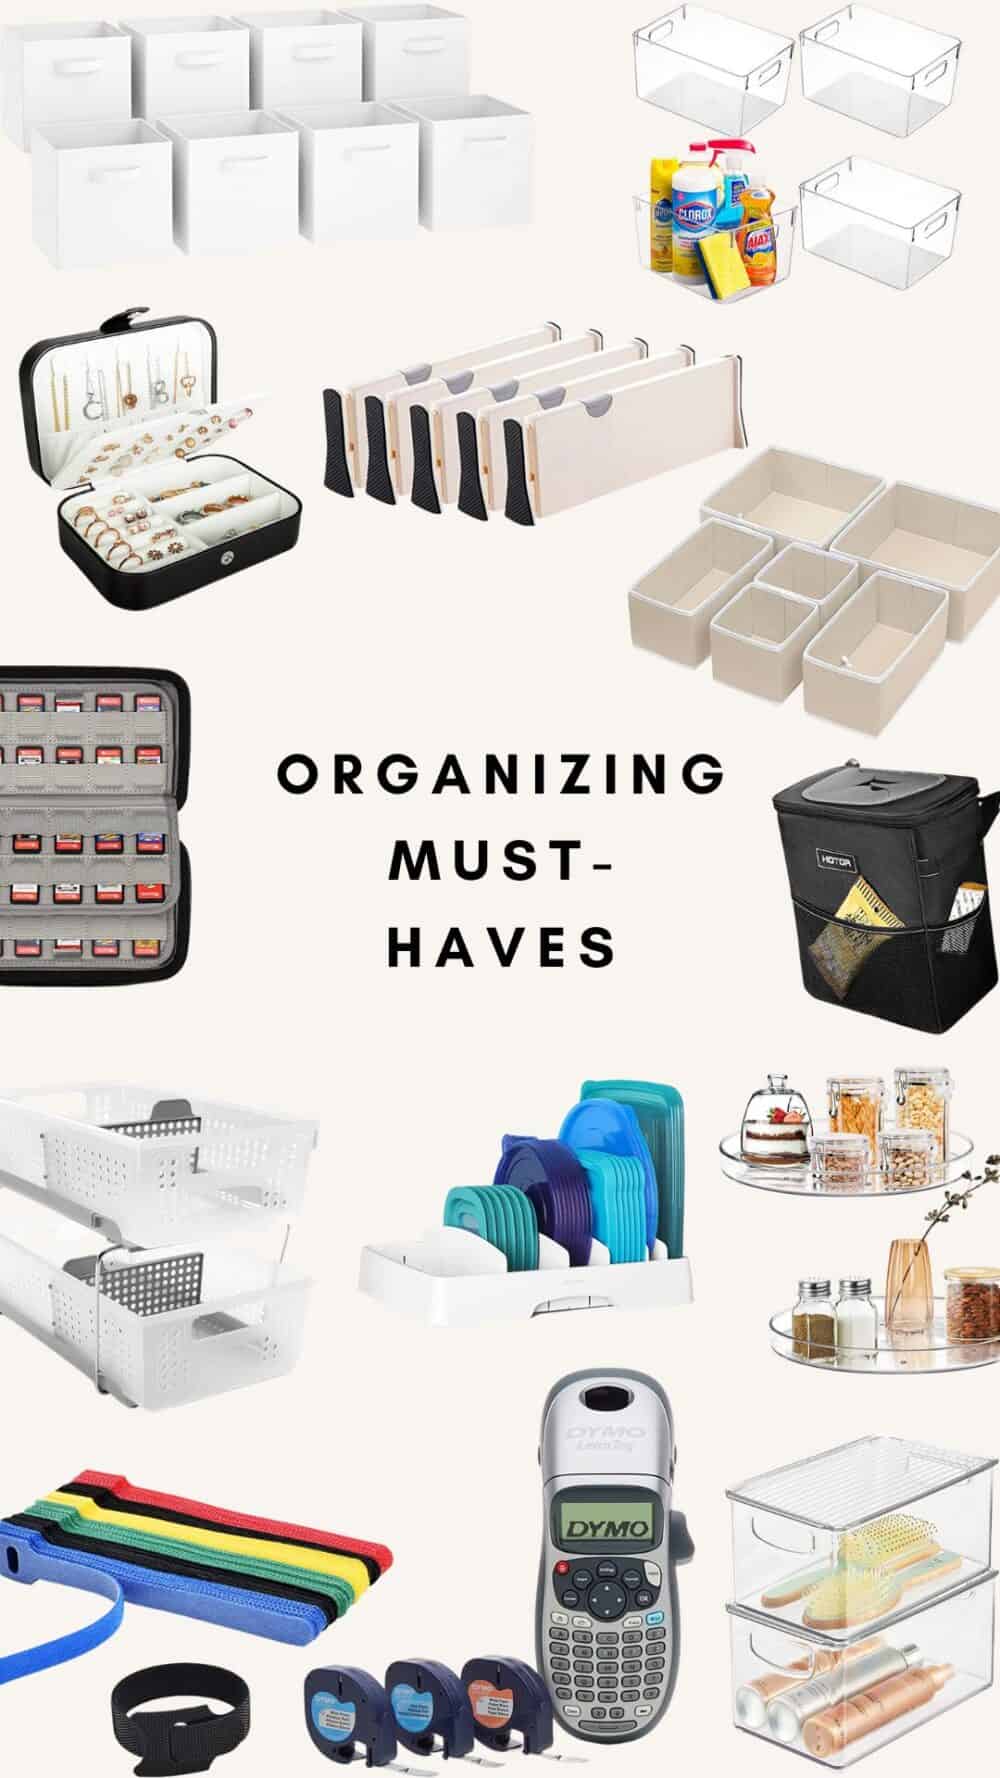 Best Home Organizing Products 2023: New Year's Organization Ideas